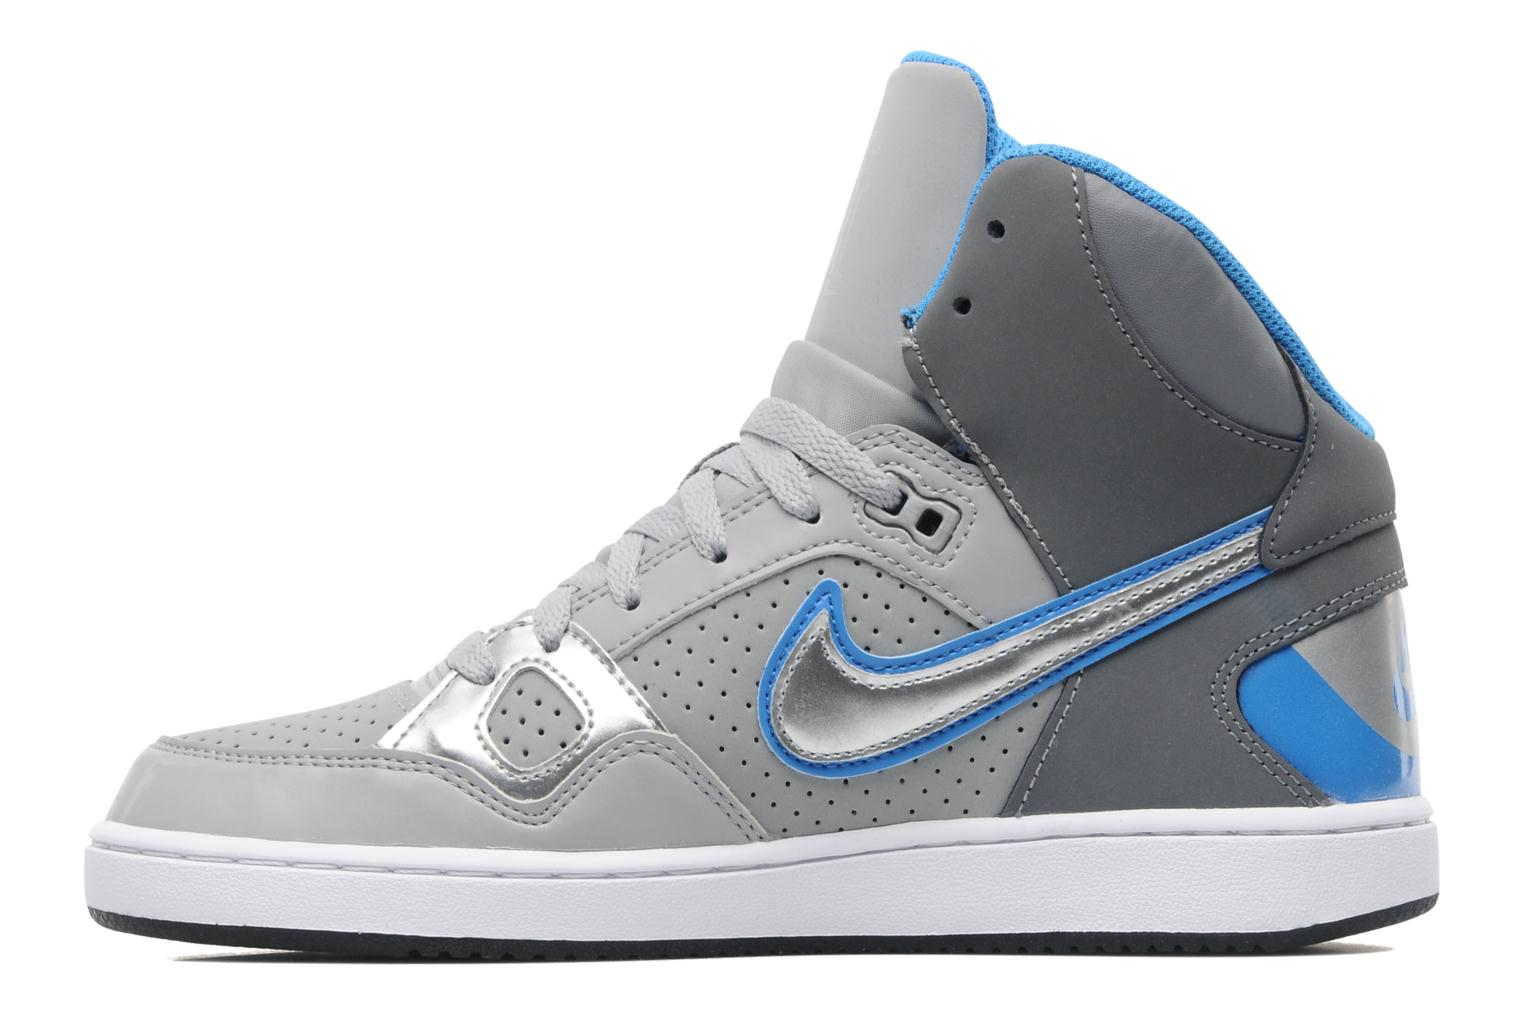 Nike Son Of Force Mid Trainers in Grey at Sarenza.co.uk (182100)